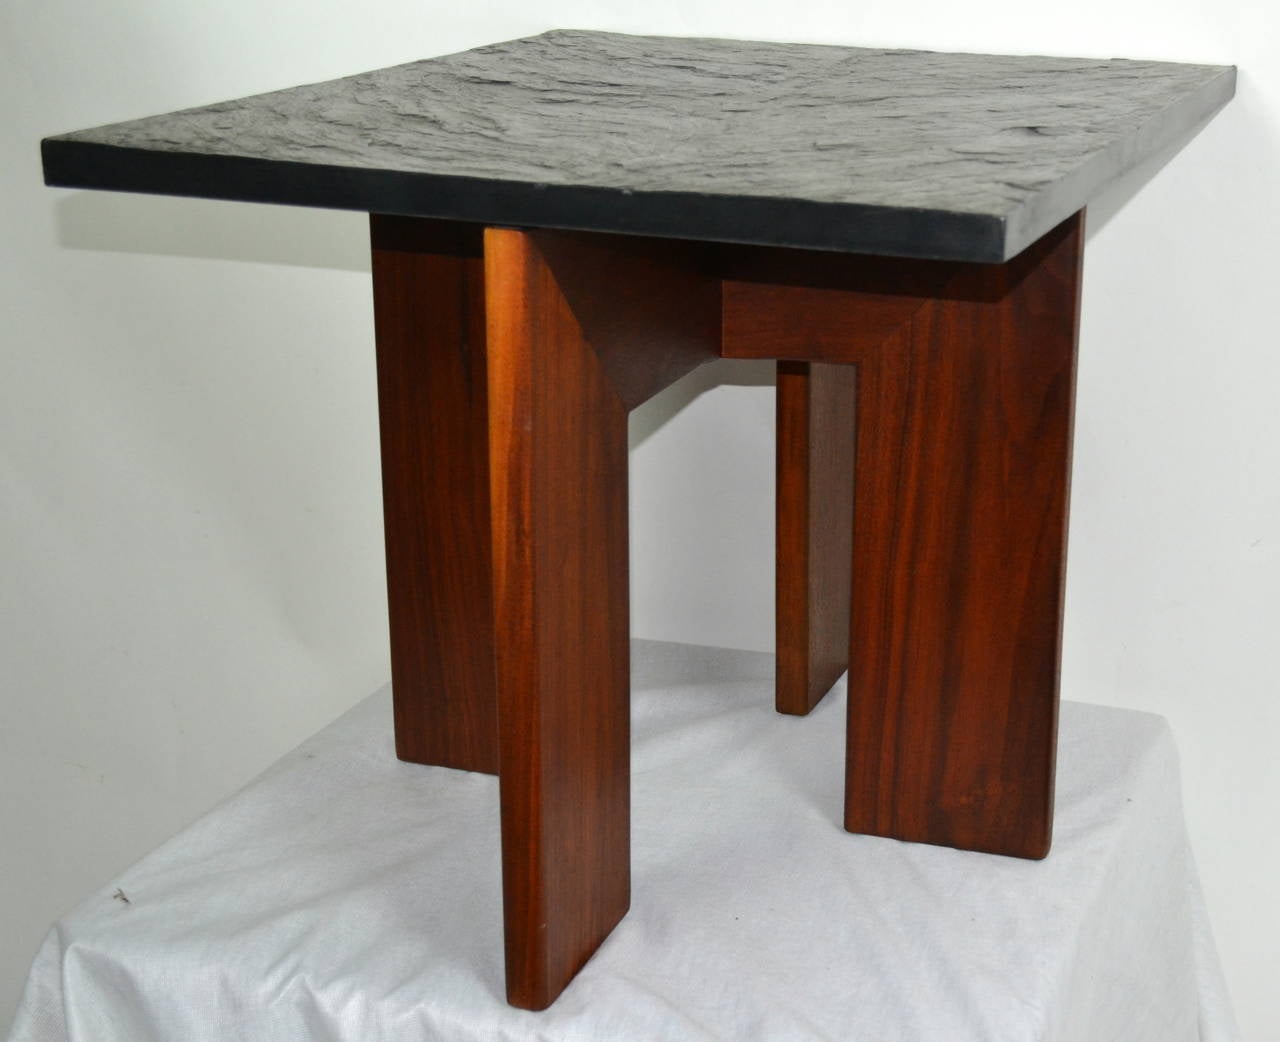 Walnut based end table by Adrian Pearsall for Craft Associates with its original slate top.
The base and slate top are in excellent condition.